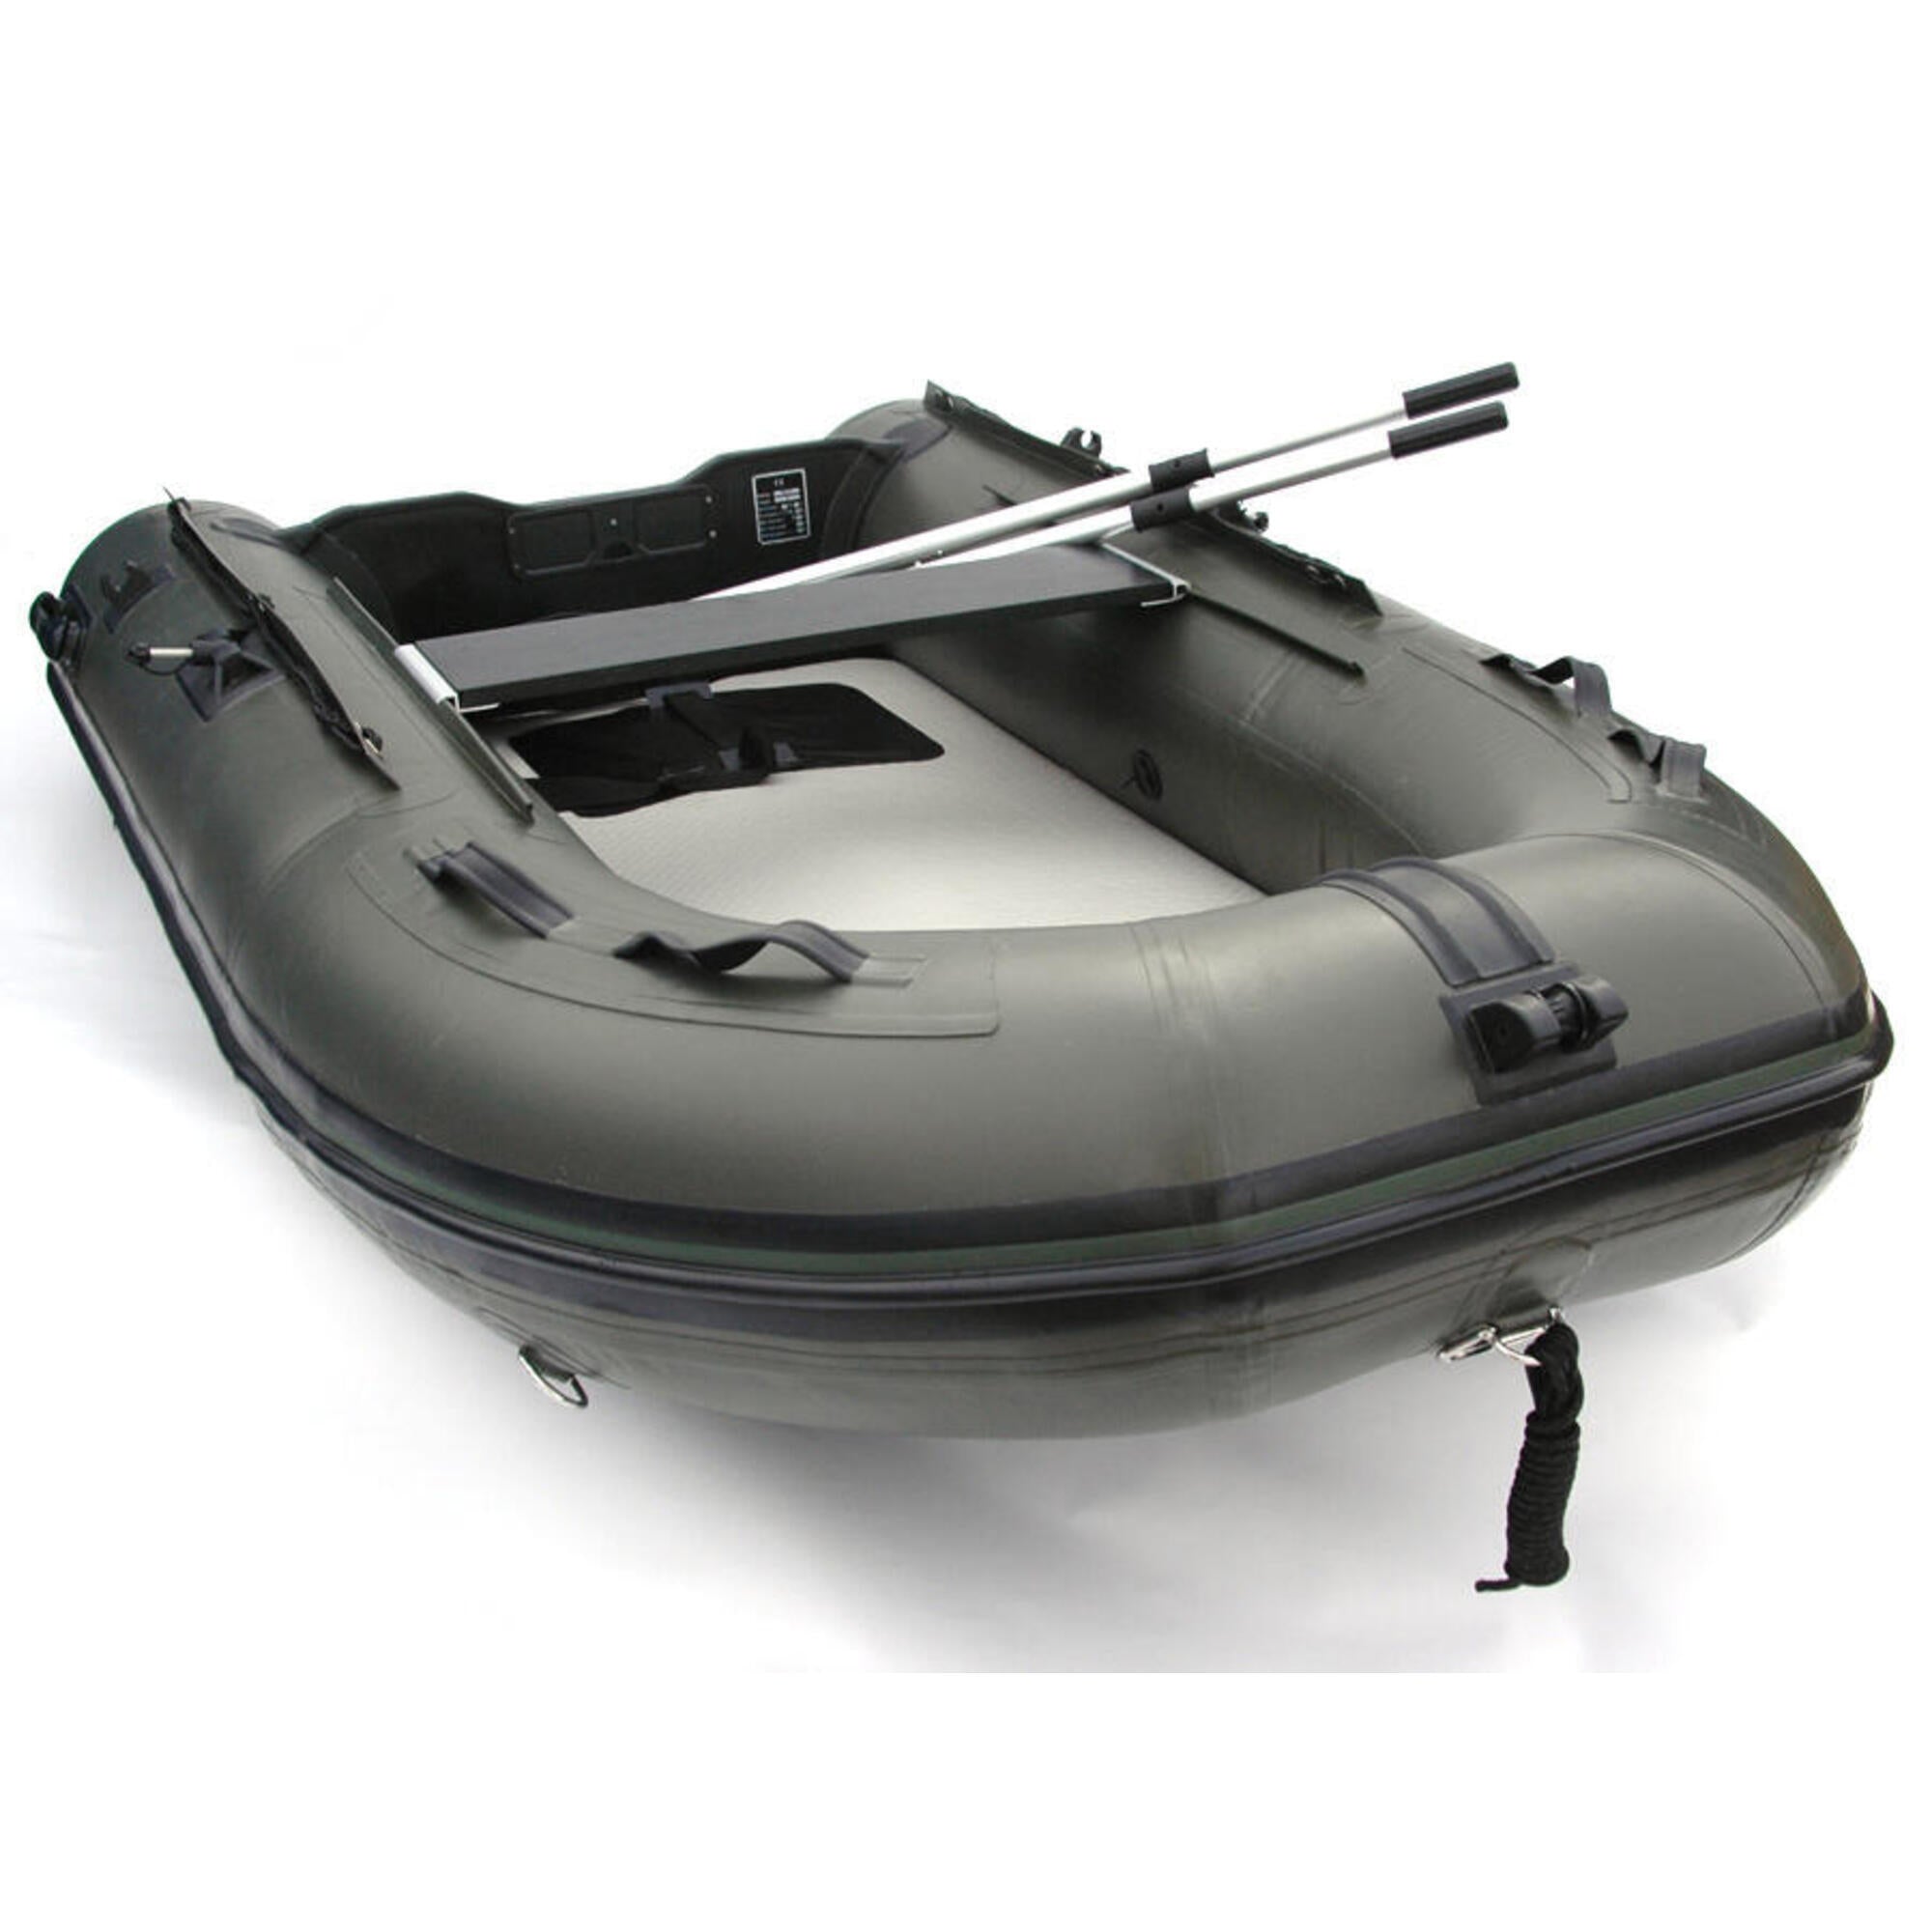 Buy any Bison Boat & Get 20% off a Bison Outboard.